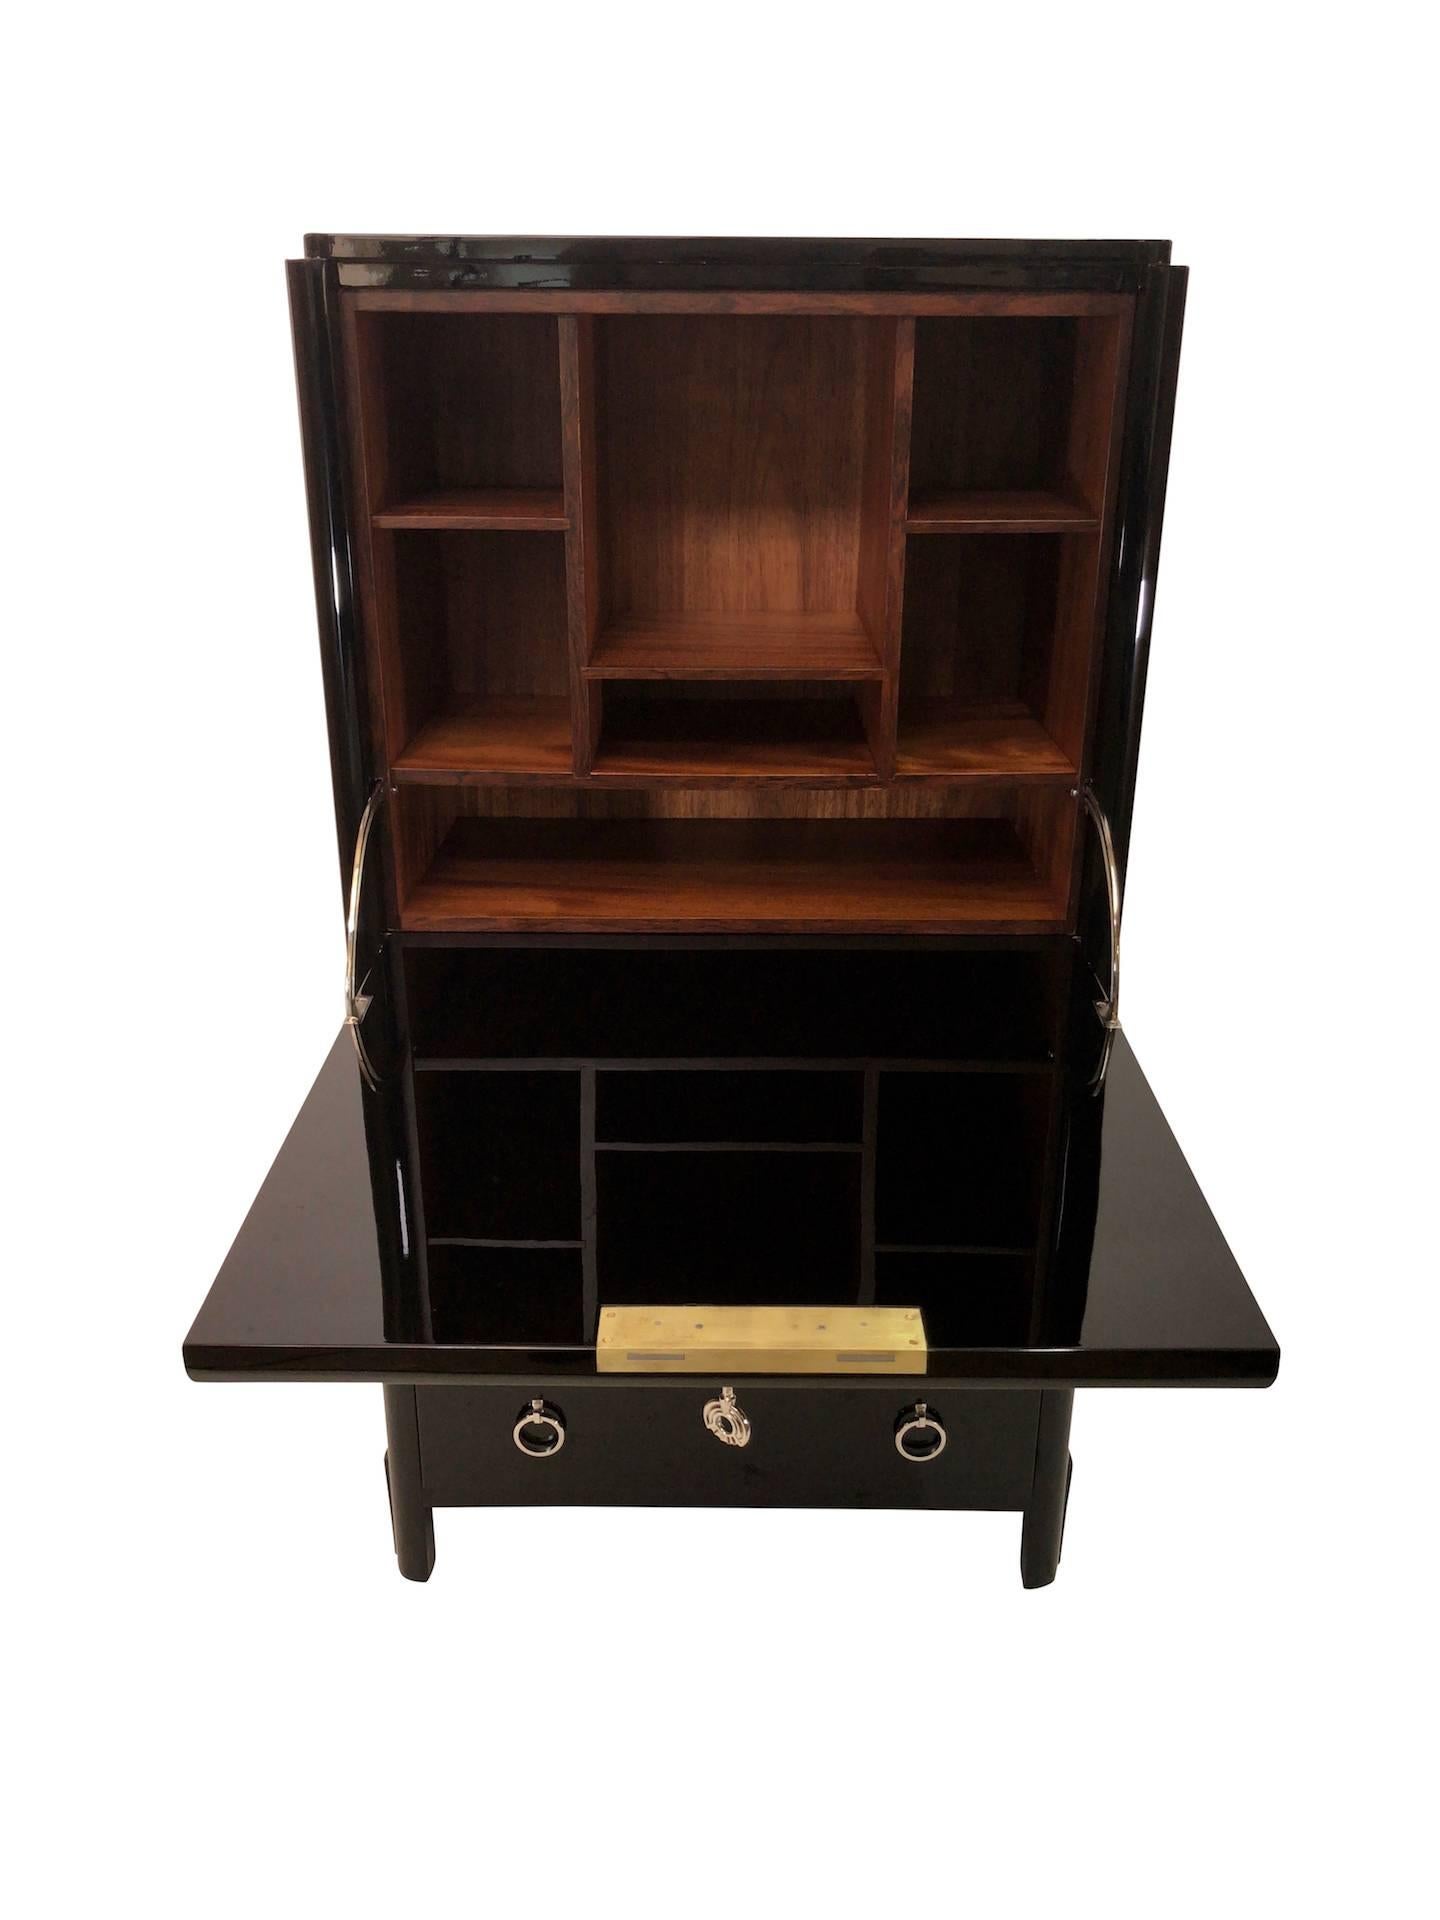 Strong bureau with drawers
Original Art Deco, France, 1930s

High quality restoration
Black piano lacquer
Fresh nickelled fittings

Dimensions:
Width 70 cm
Height 130 cm
Depth 36 cm.